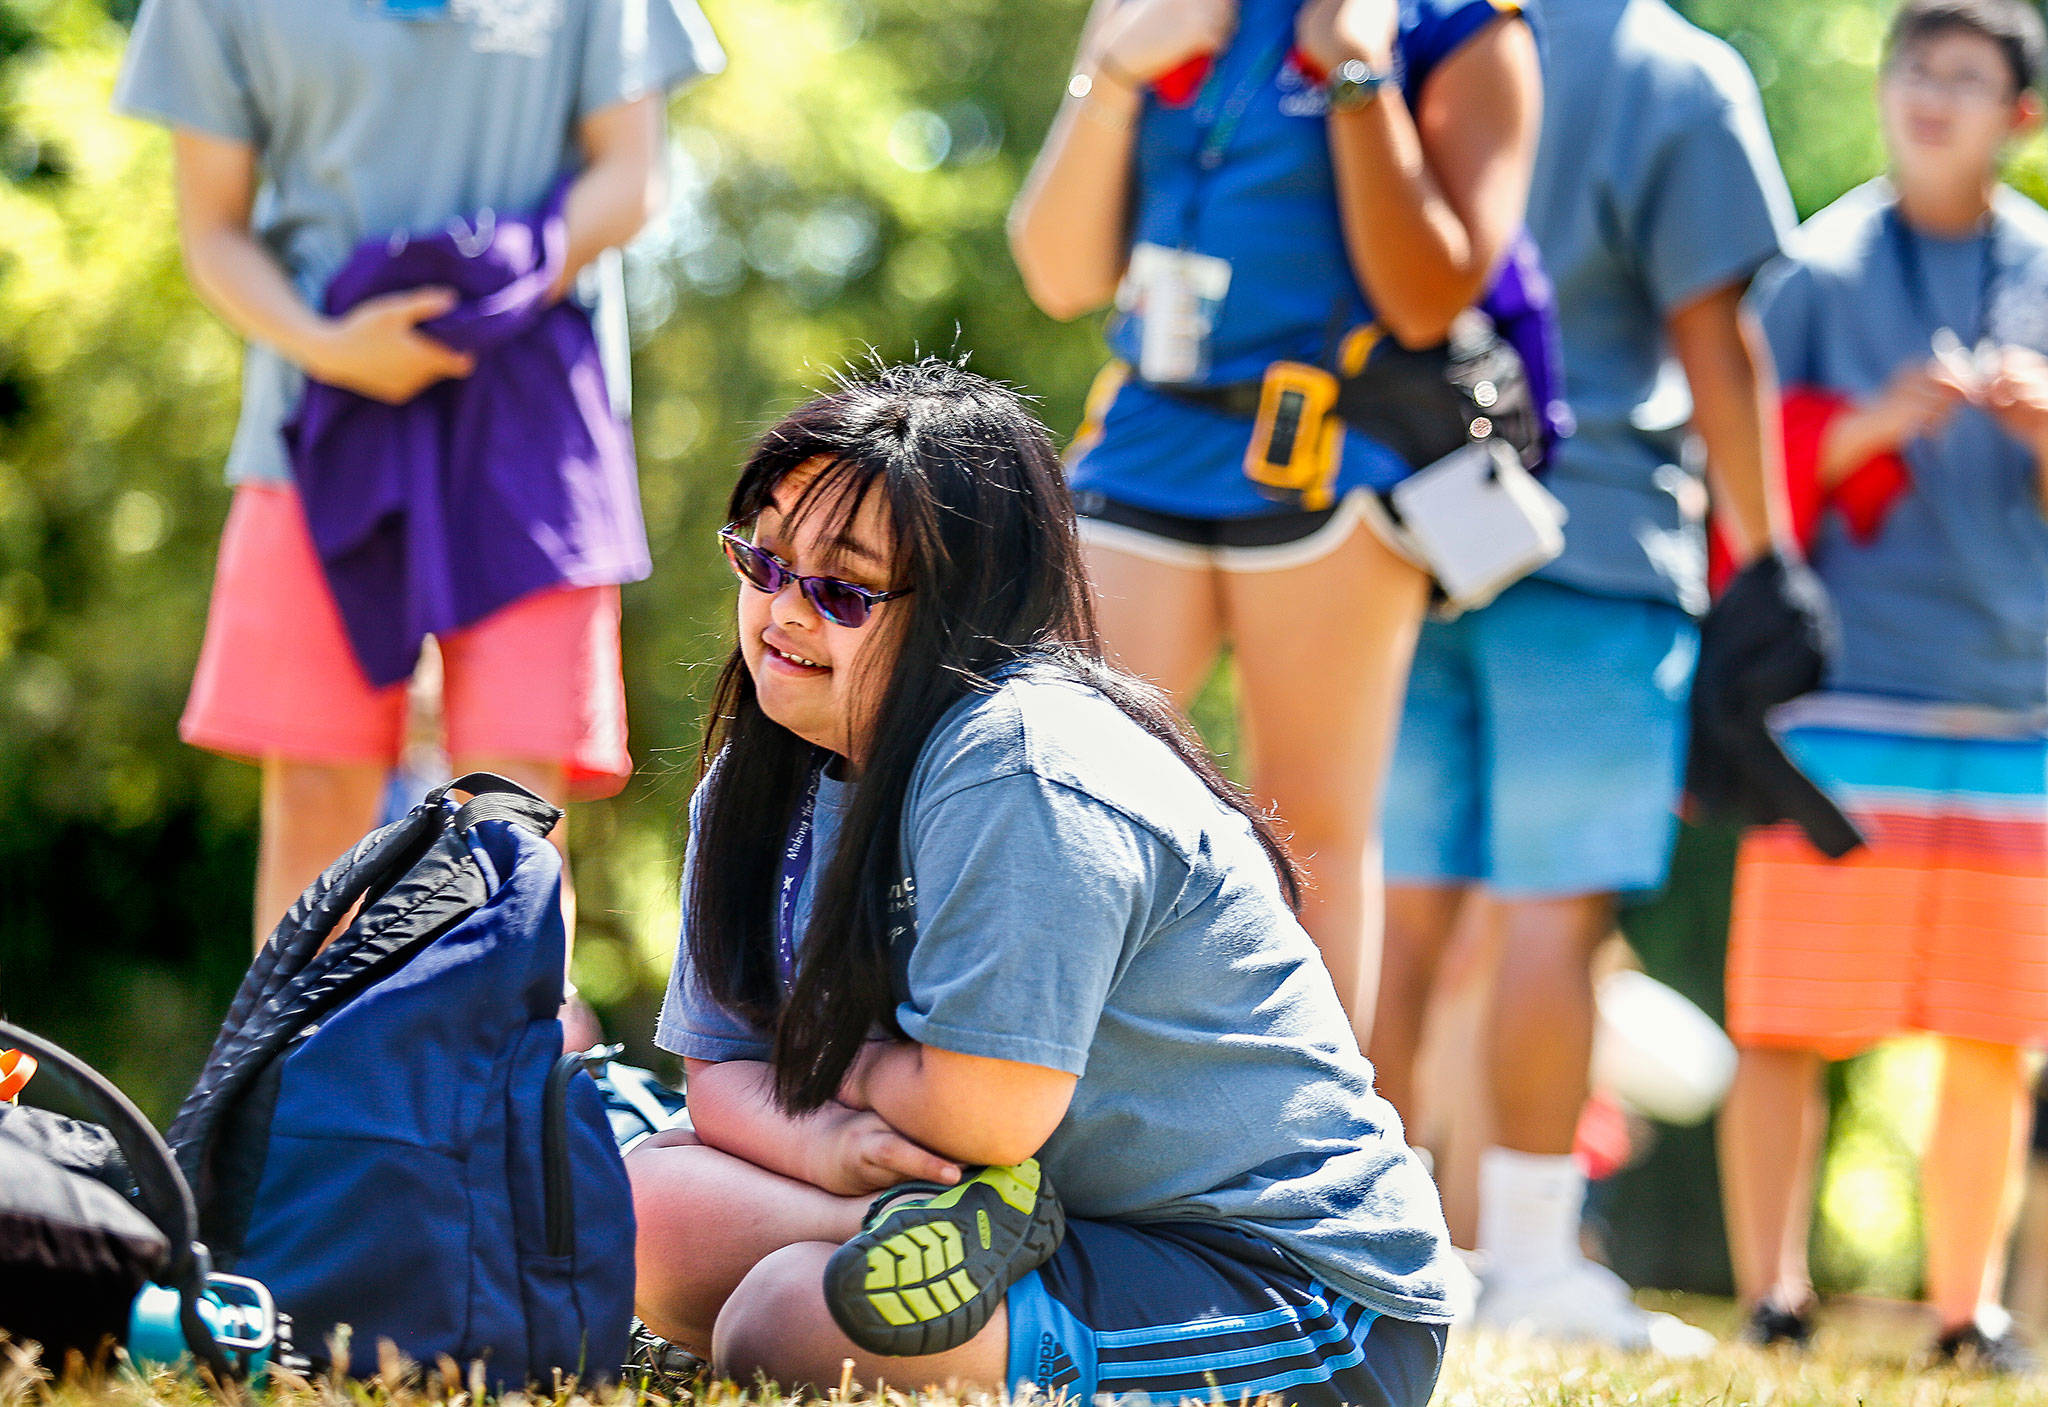 After arriving at Camp Prov in Forest Park on Wednesday, volunteer Bre Baylon sits down on the dry grass and enjoys the sights around her. She’s a former camper in the program for children with special needs. (Dan Bates / The Herald)